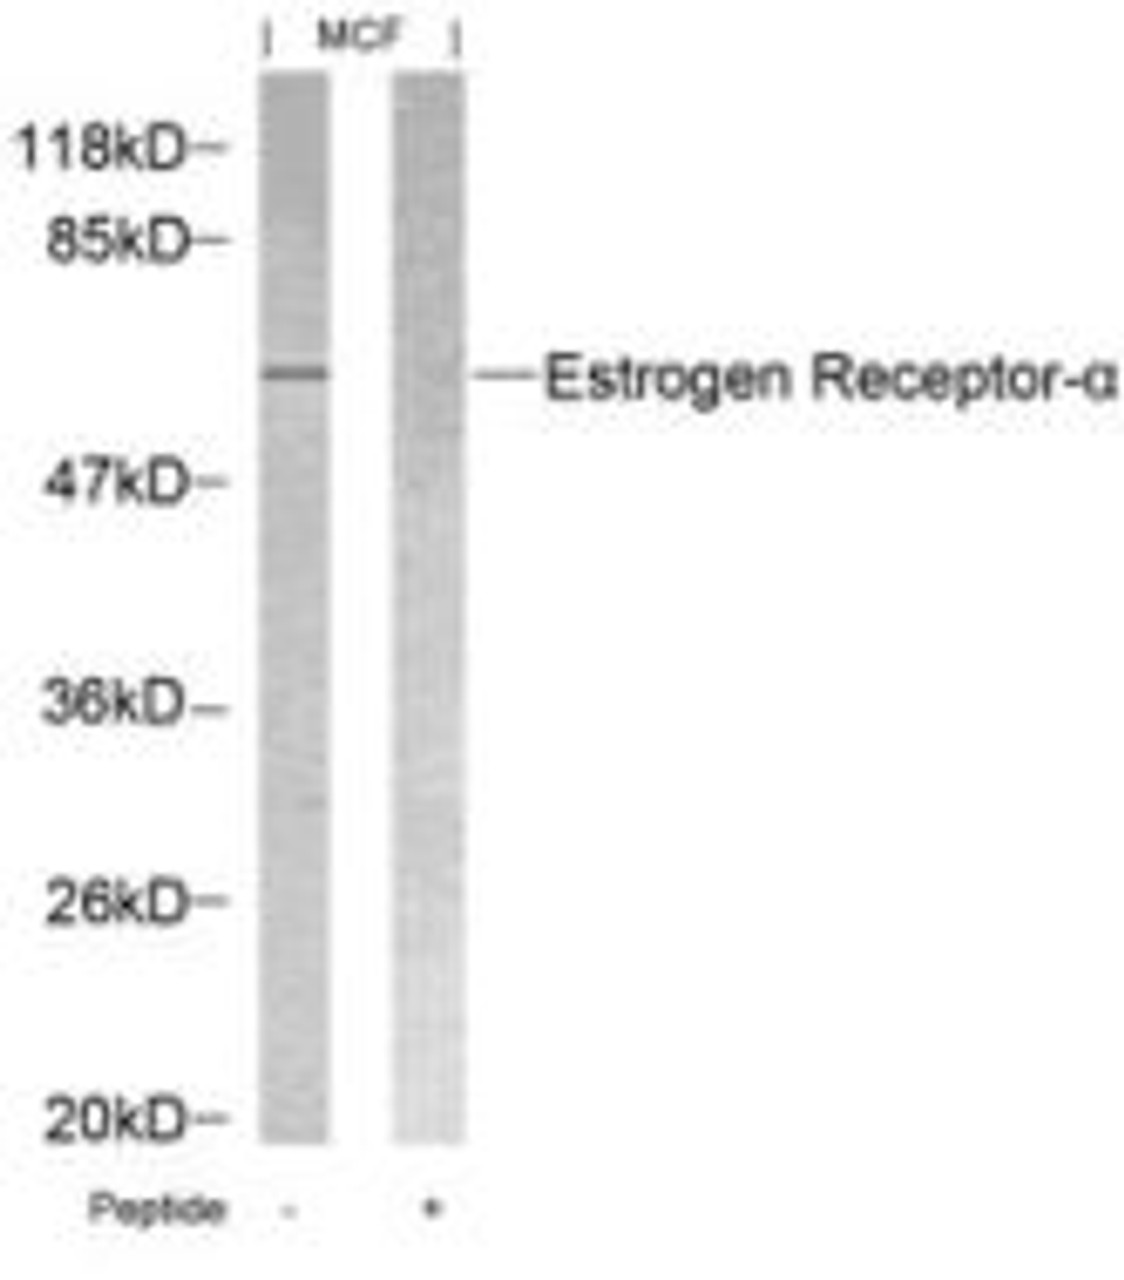 Western blot analysis of lysed extracts from MCF cells using Estrogen Receptor-&#945; (Ab-118) .